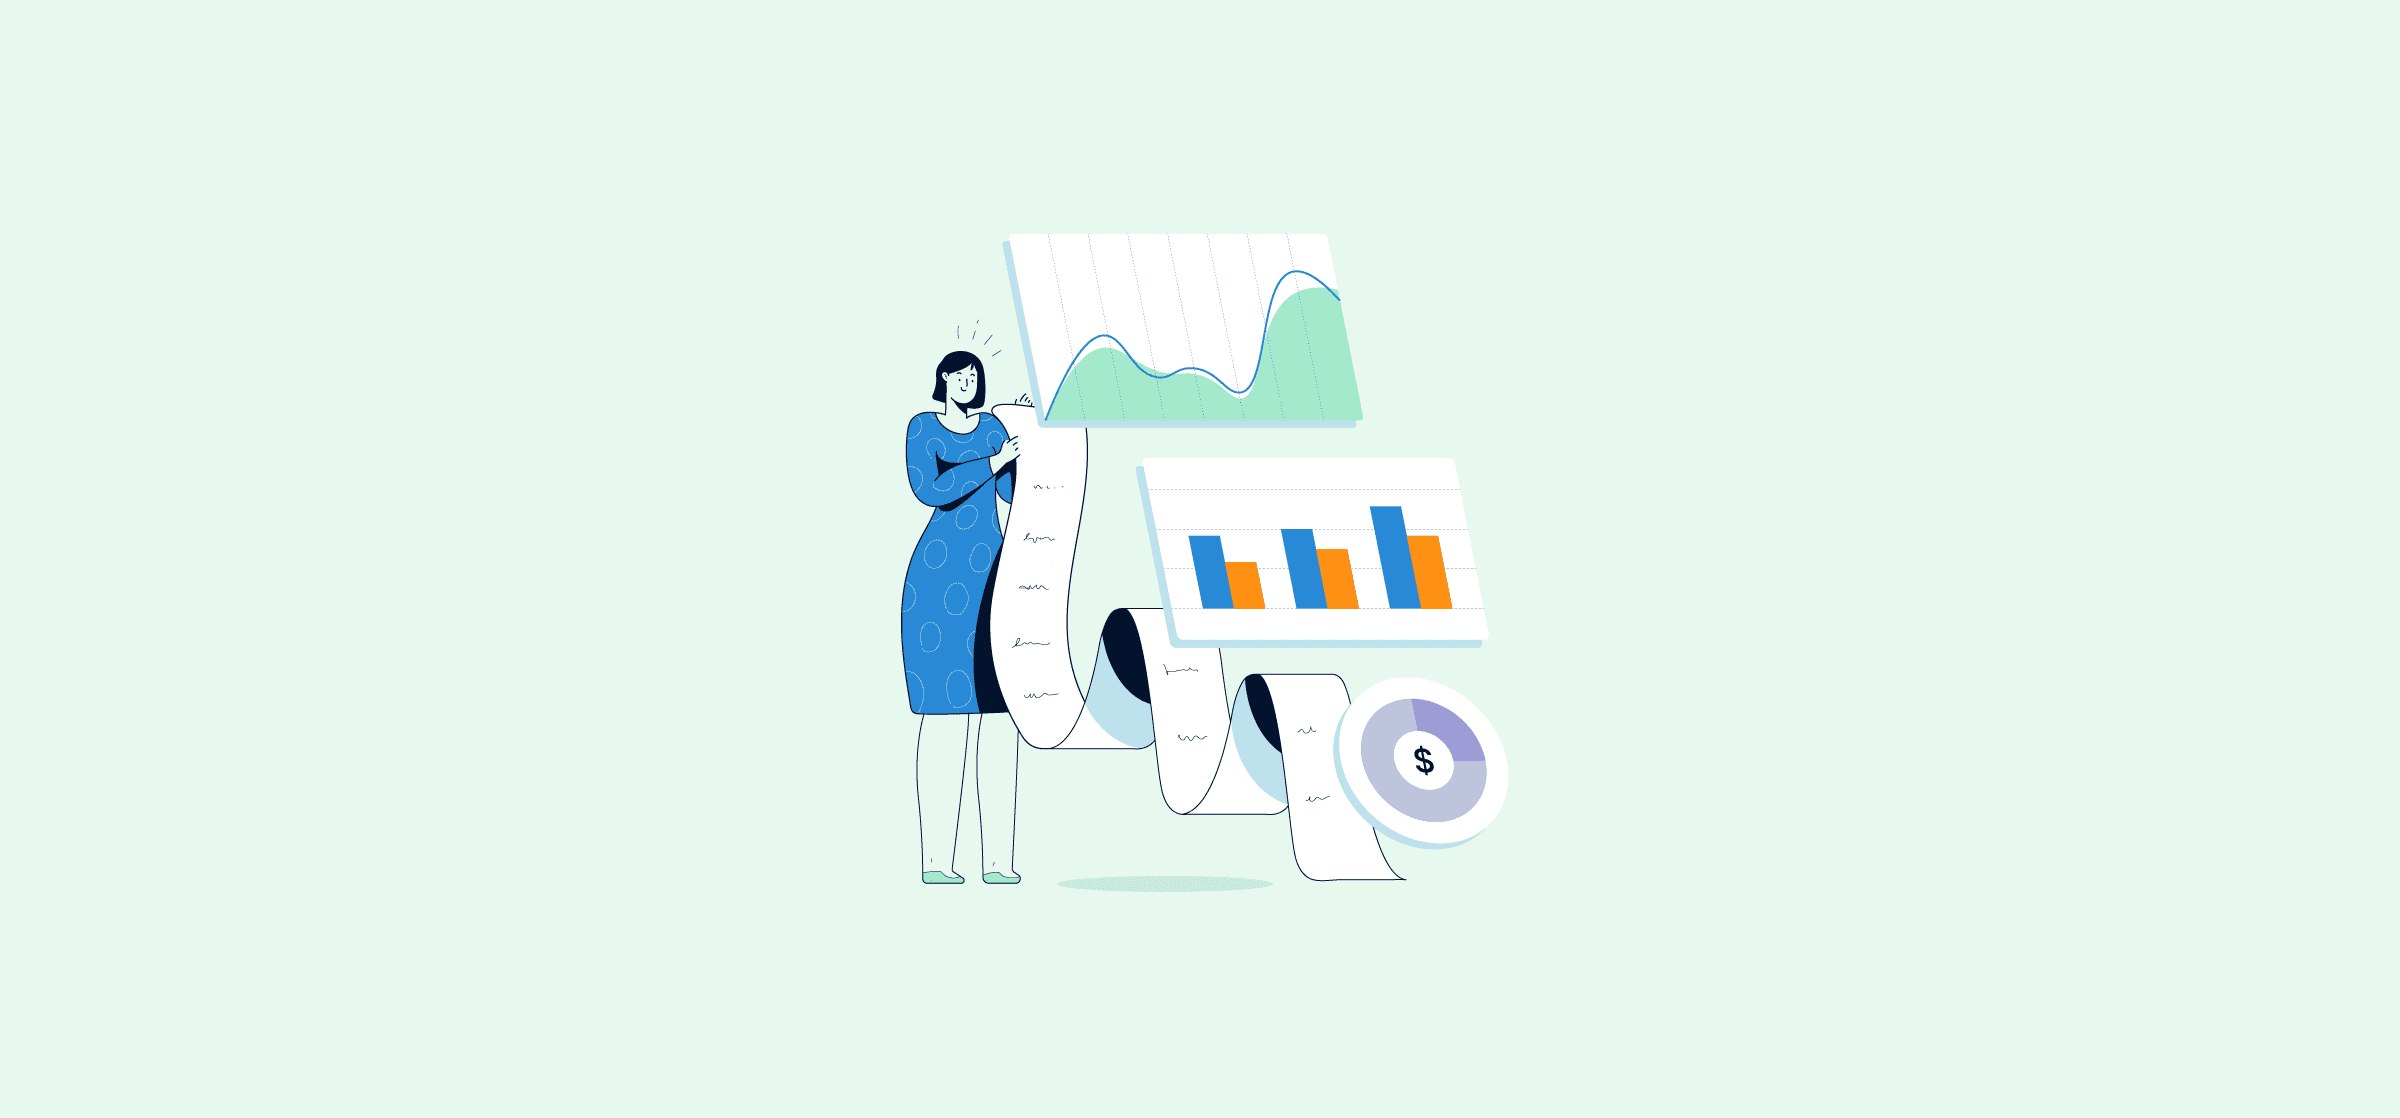 An illustration of a person with an unrolling leaf of paper and charts, representing sales report templates.